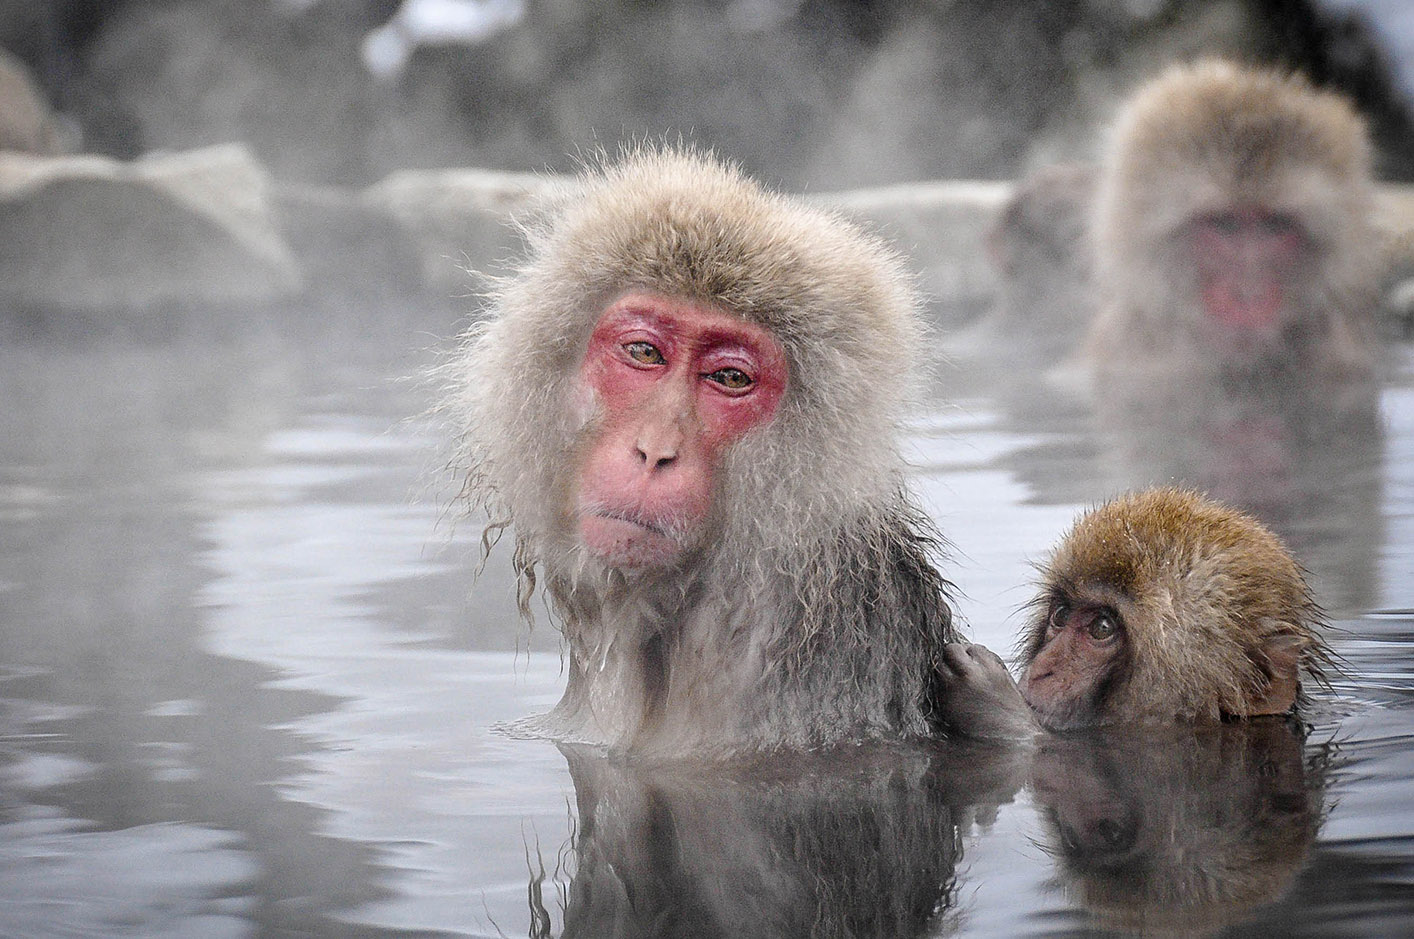 Snow Monkeys in Japan First timers Guide